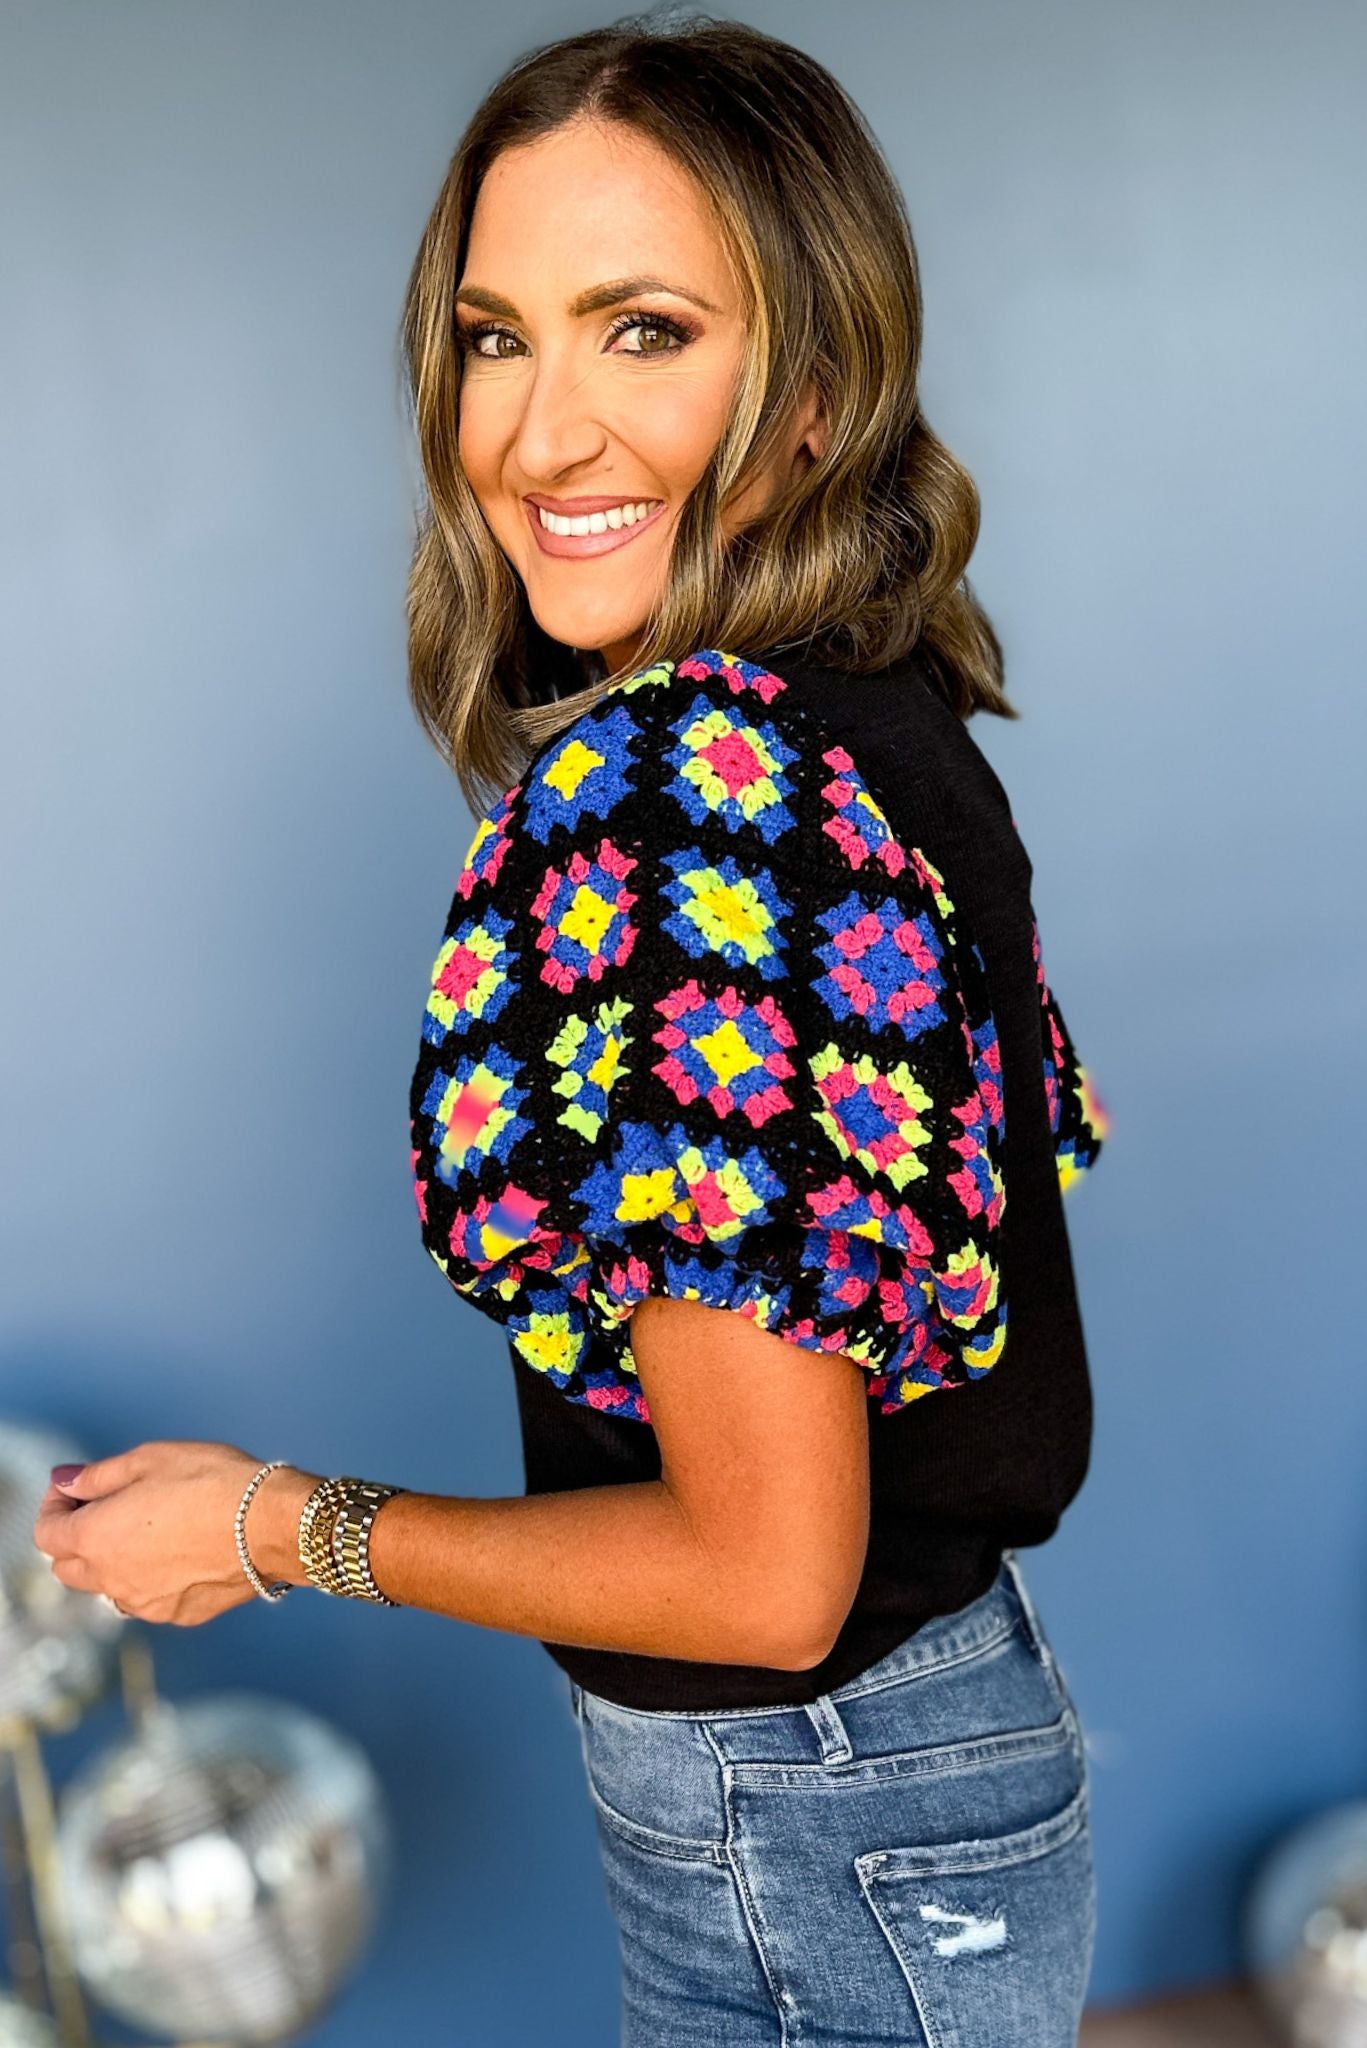 Load image into Gallery viewer, THML Black Crochet Puff Short Sleeve Top, THML top, elevated style, statement sleeve, crochet sleeve, mom style, elevated top, fall top, bright top, work to weekend top, must have top, must have THML, must have style, shop style your senses by mallory fitzsimmons
